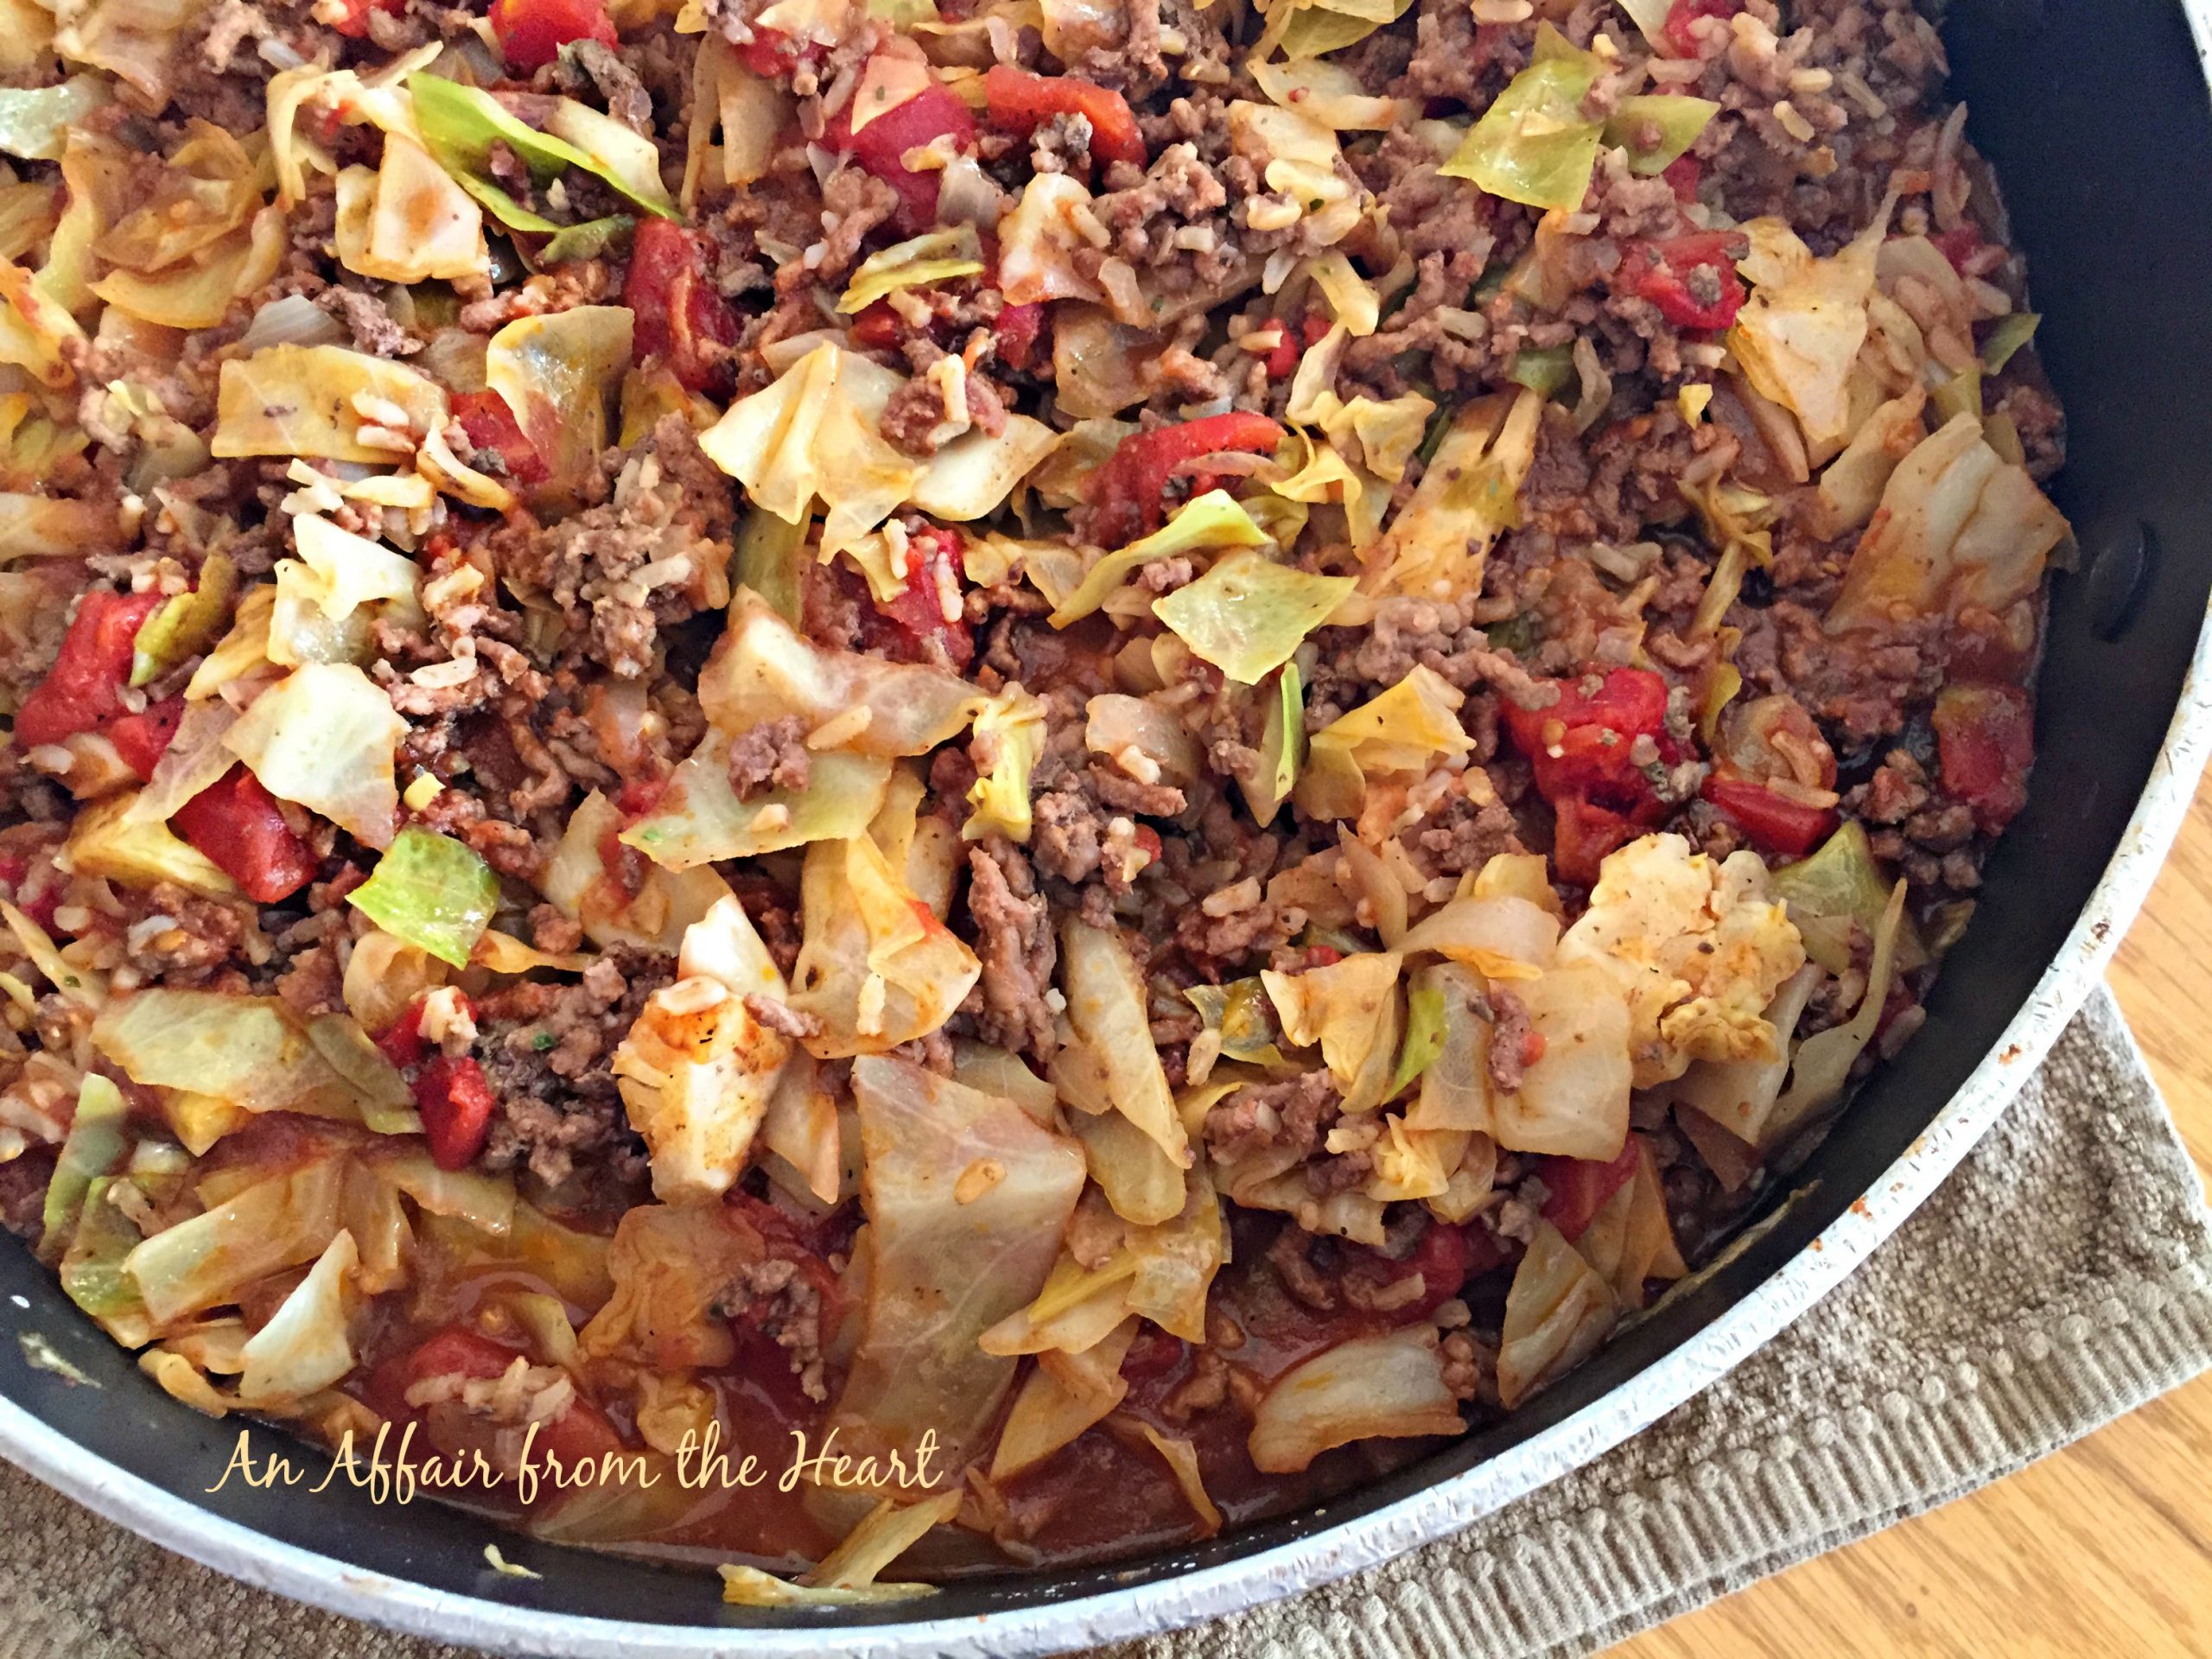 Unstuffed Cabbage Rolls With Rice
 Unstuffed Cabbage Roll Skillet